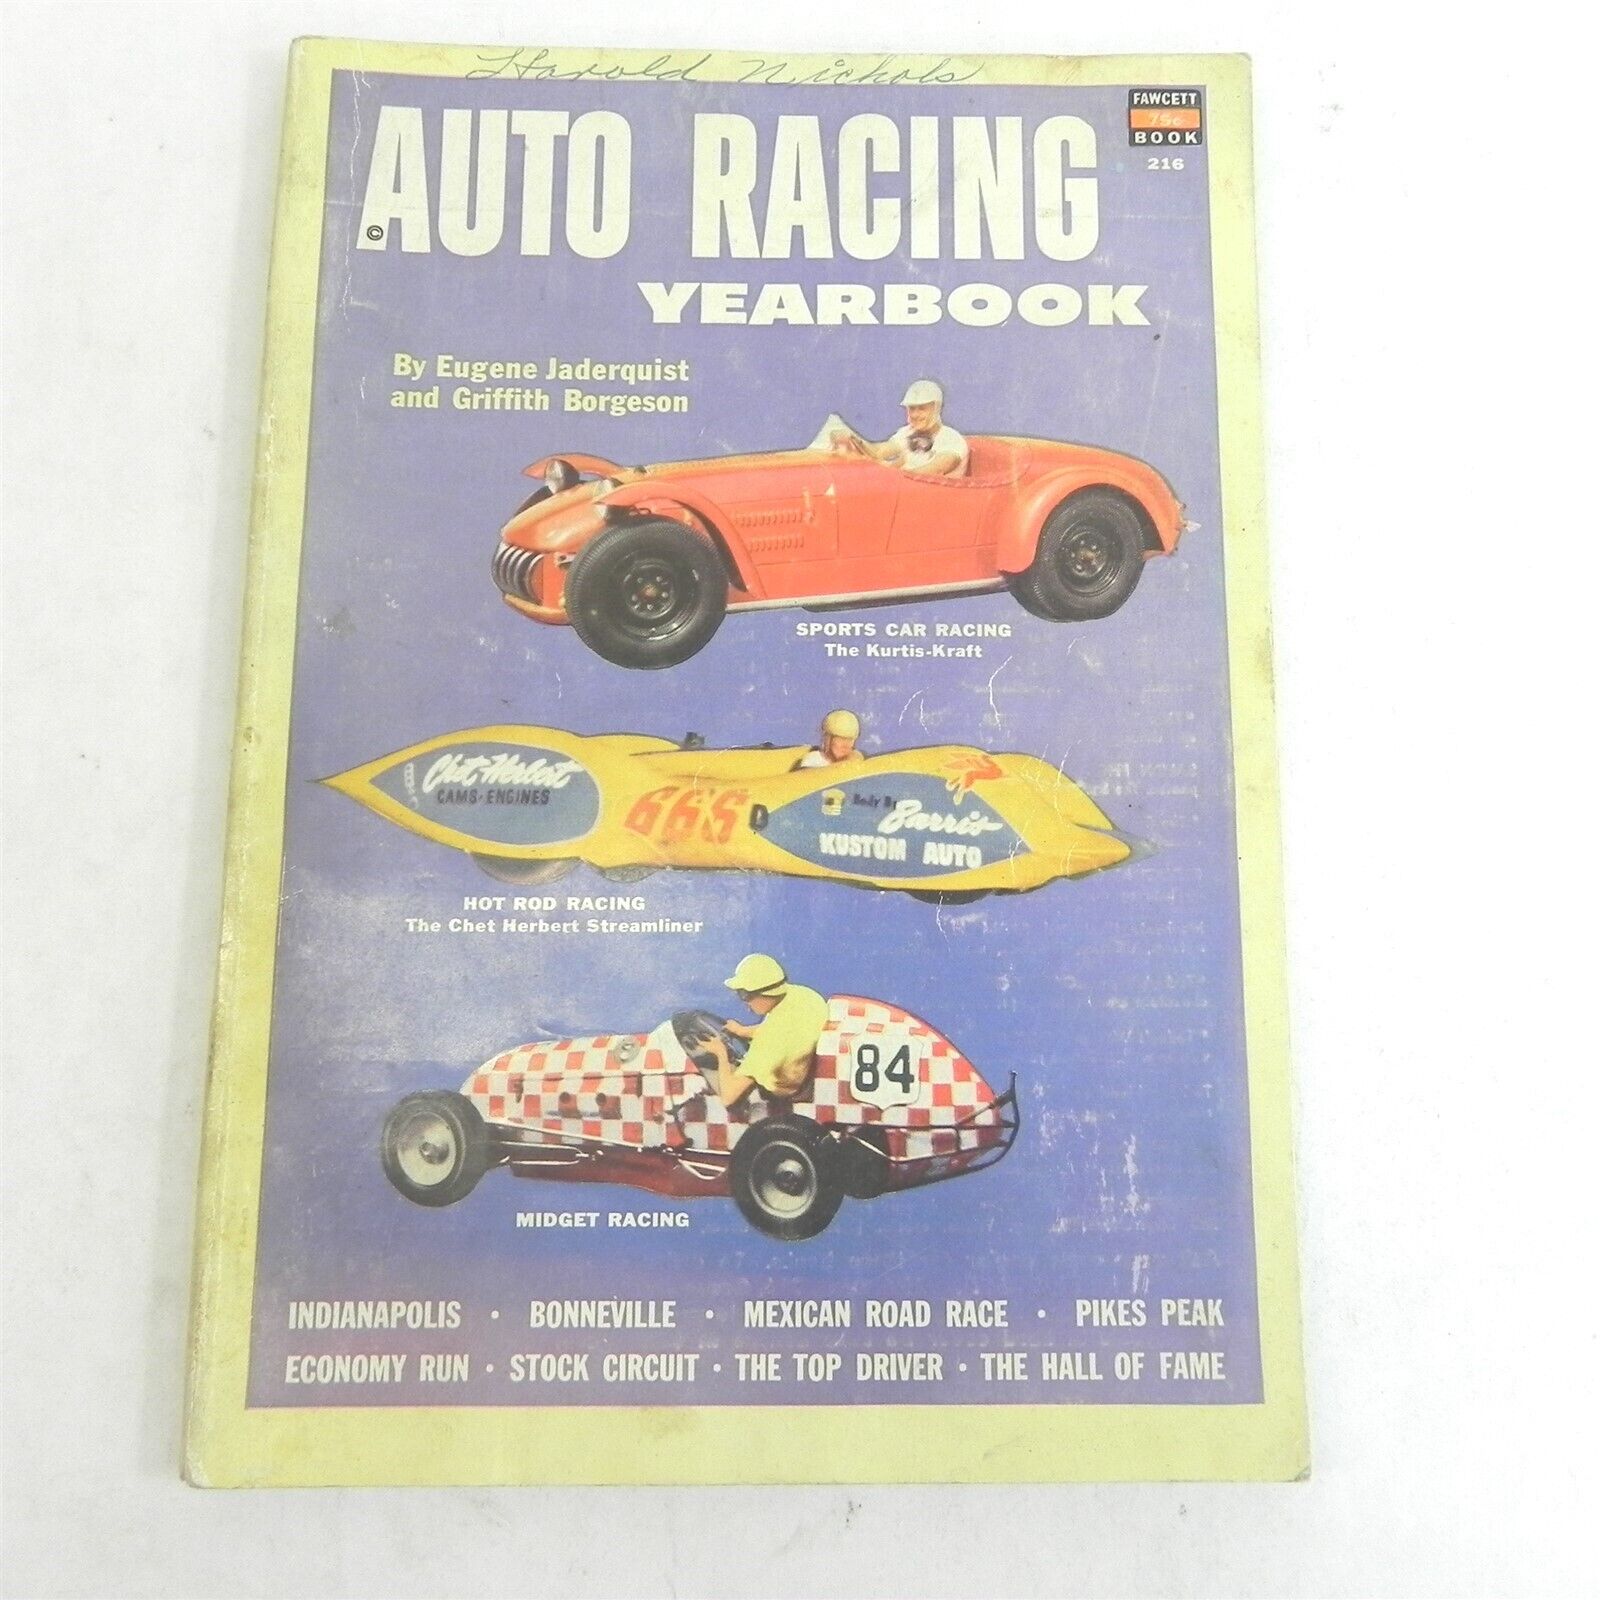 VINTAGE 1954 AUTO RACING YEARBOOK BY EUGENE JADERQUIST & GRIFFITH BORGESON